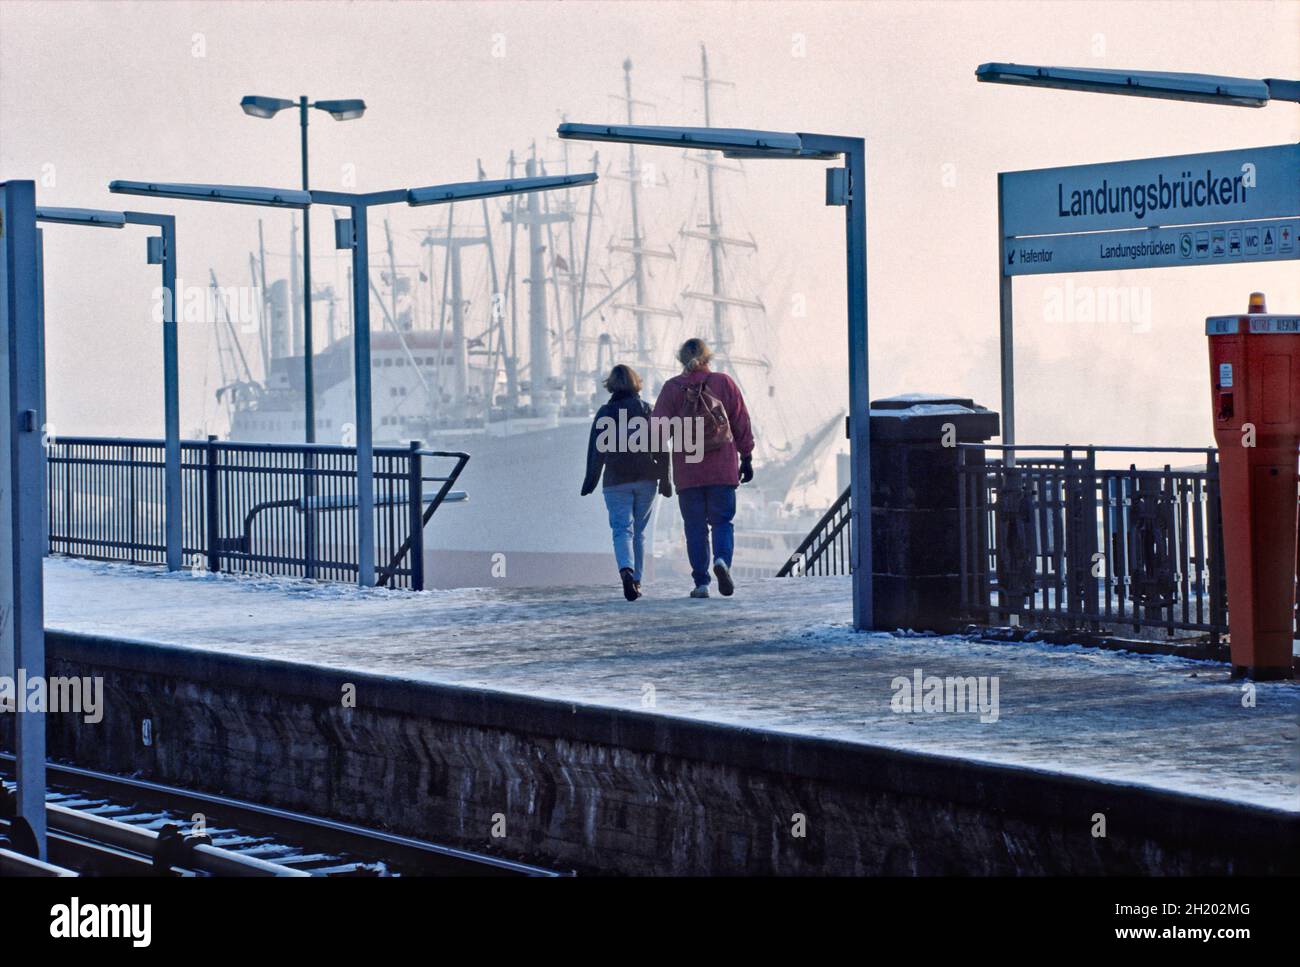 Young couple leaving the platform of S-train station Landungsbrücken in Hamburg, Germany. Stock Photo